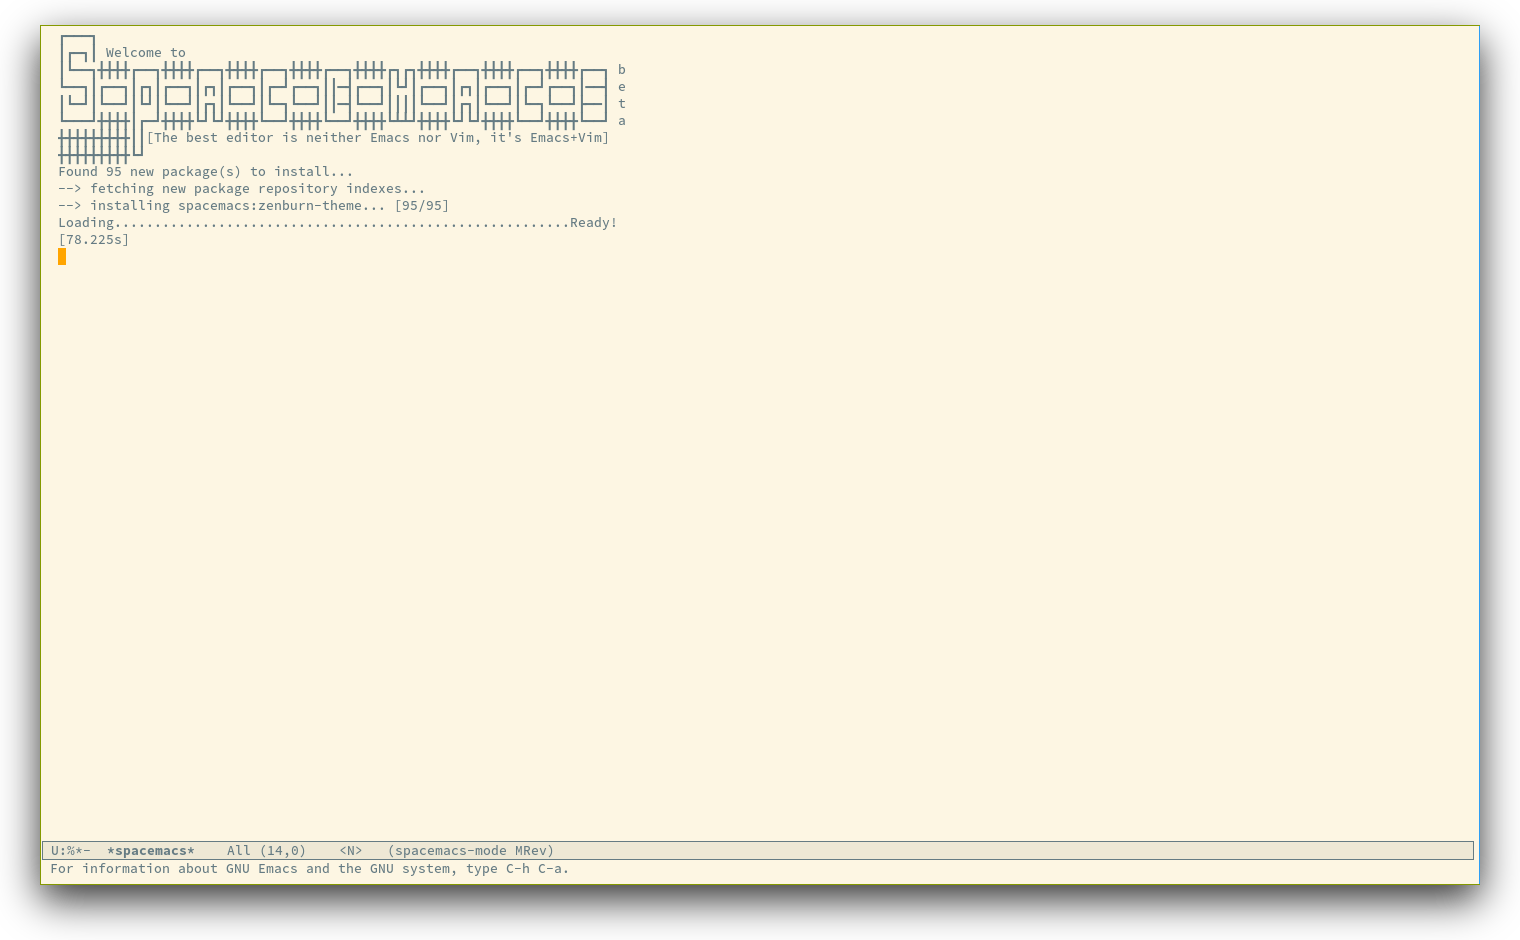 /TakeV/spacemacs/media/commit/2692332b64583df0d1abe2c9c7593da03840d719/doc/img/spacemacs-startup.png